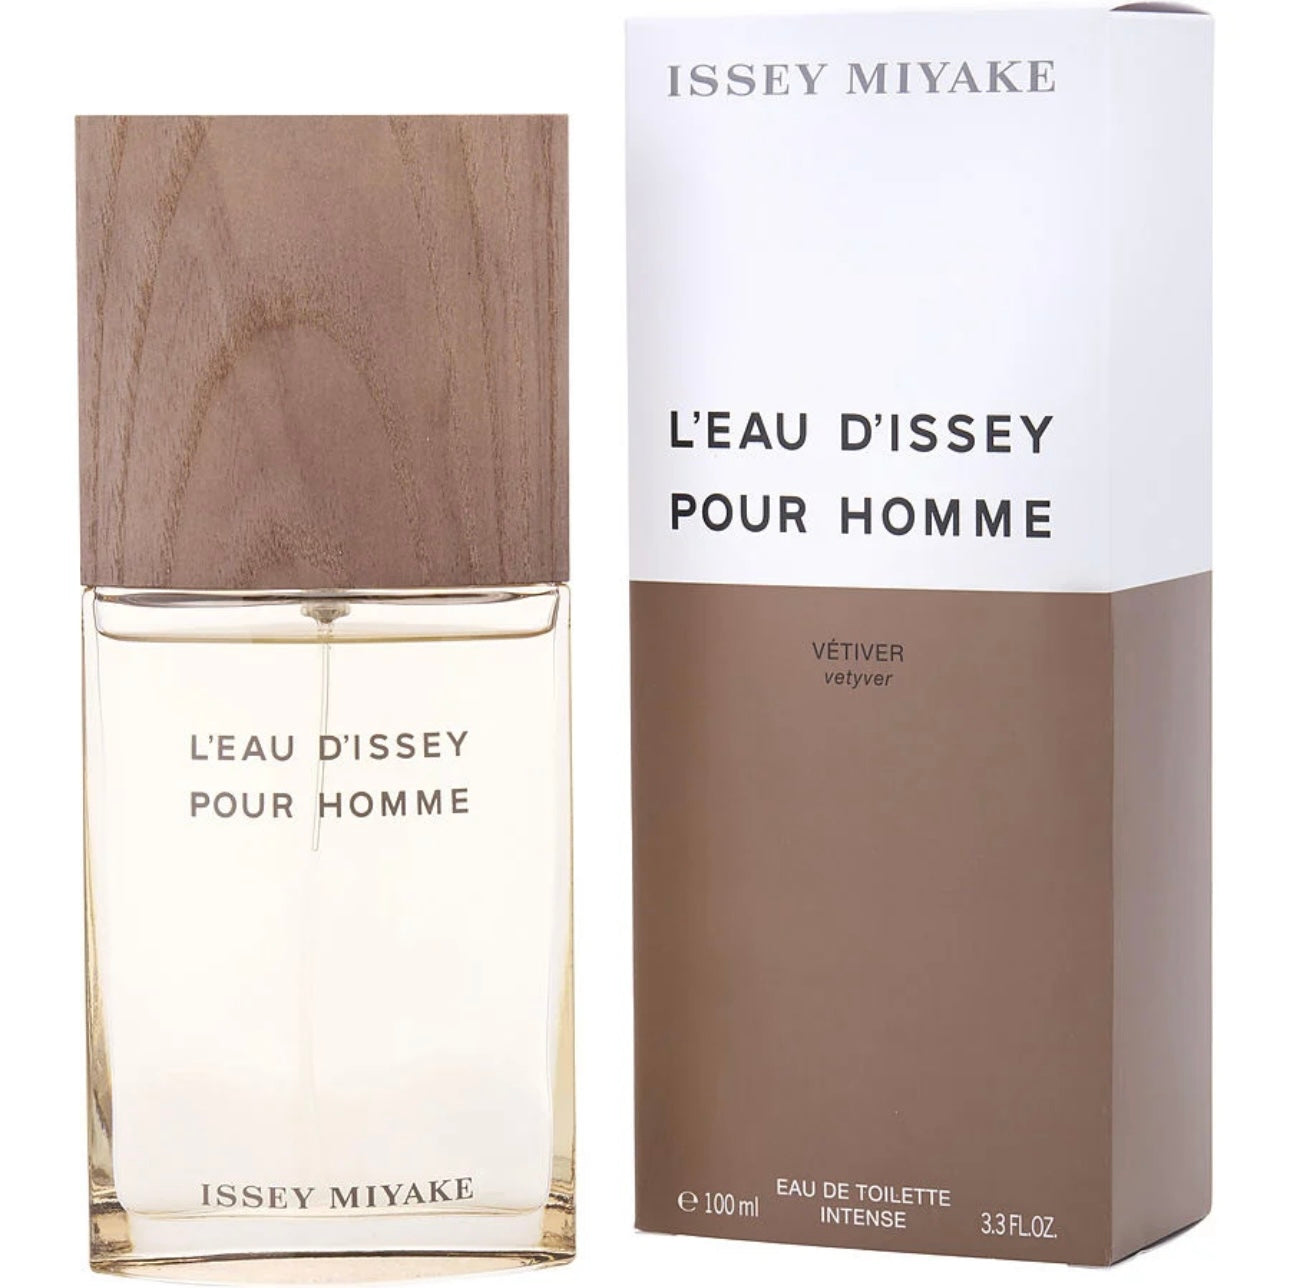 Issey Miyake- L'Eau d'Issey Pour Homme Vetiver- EdT Intense